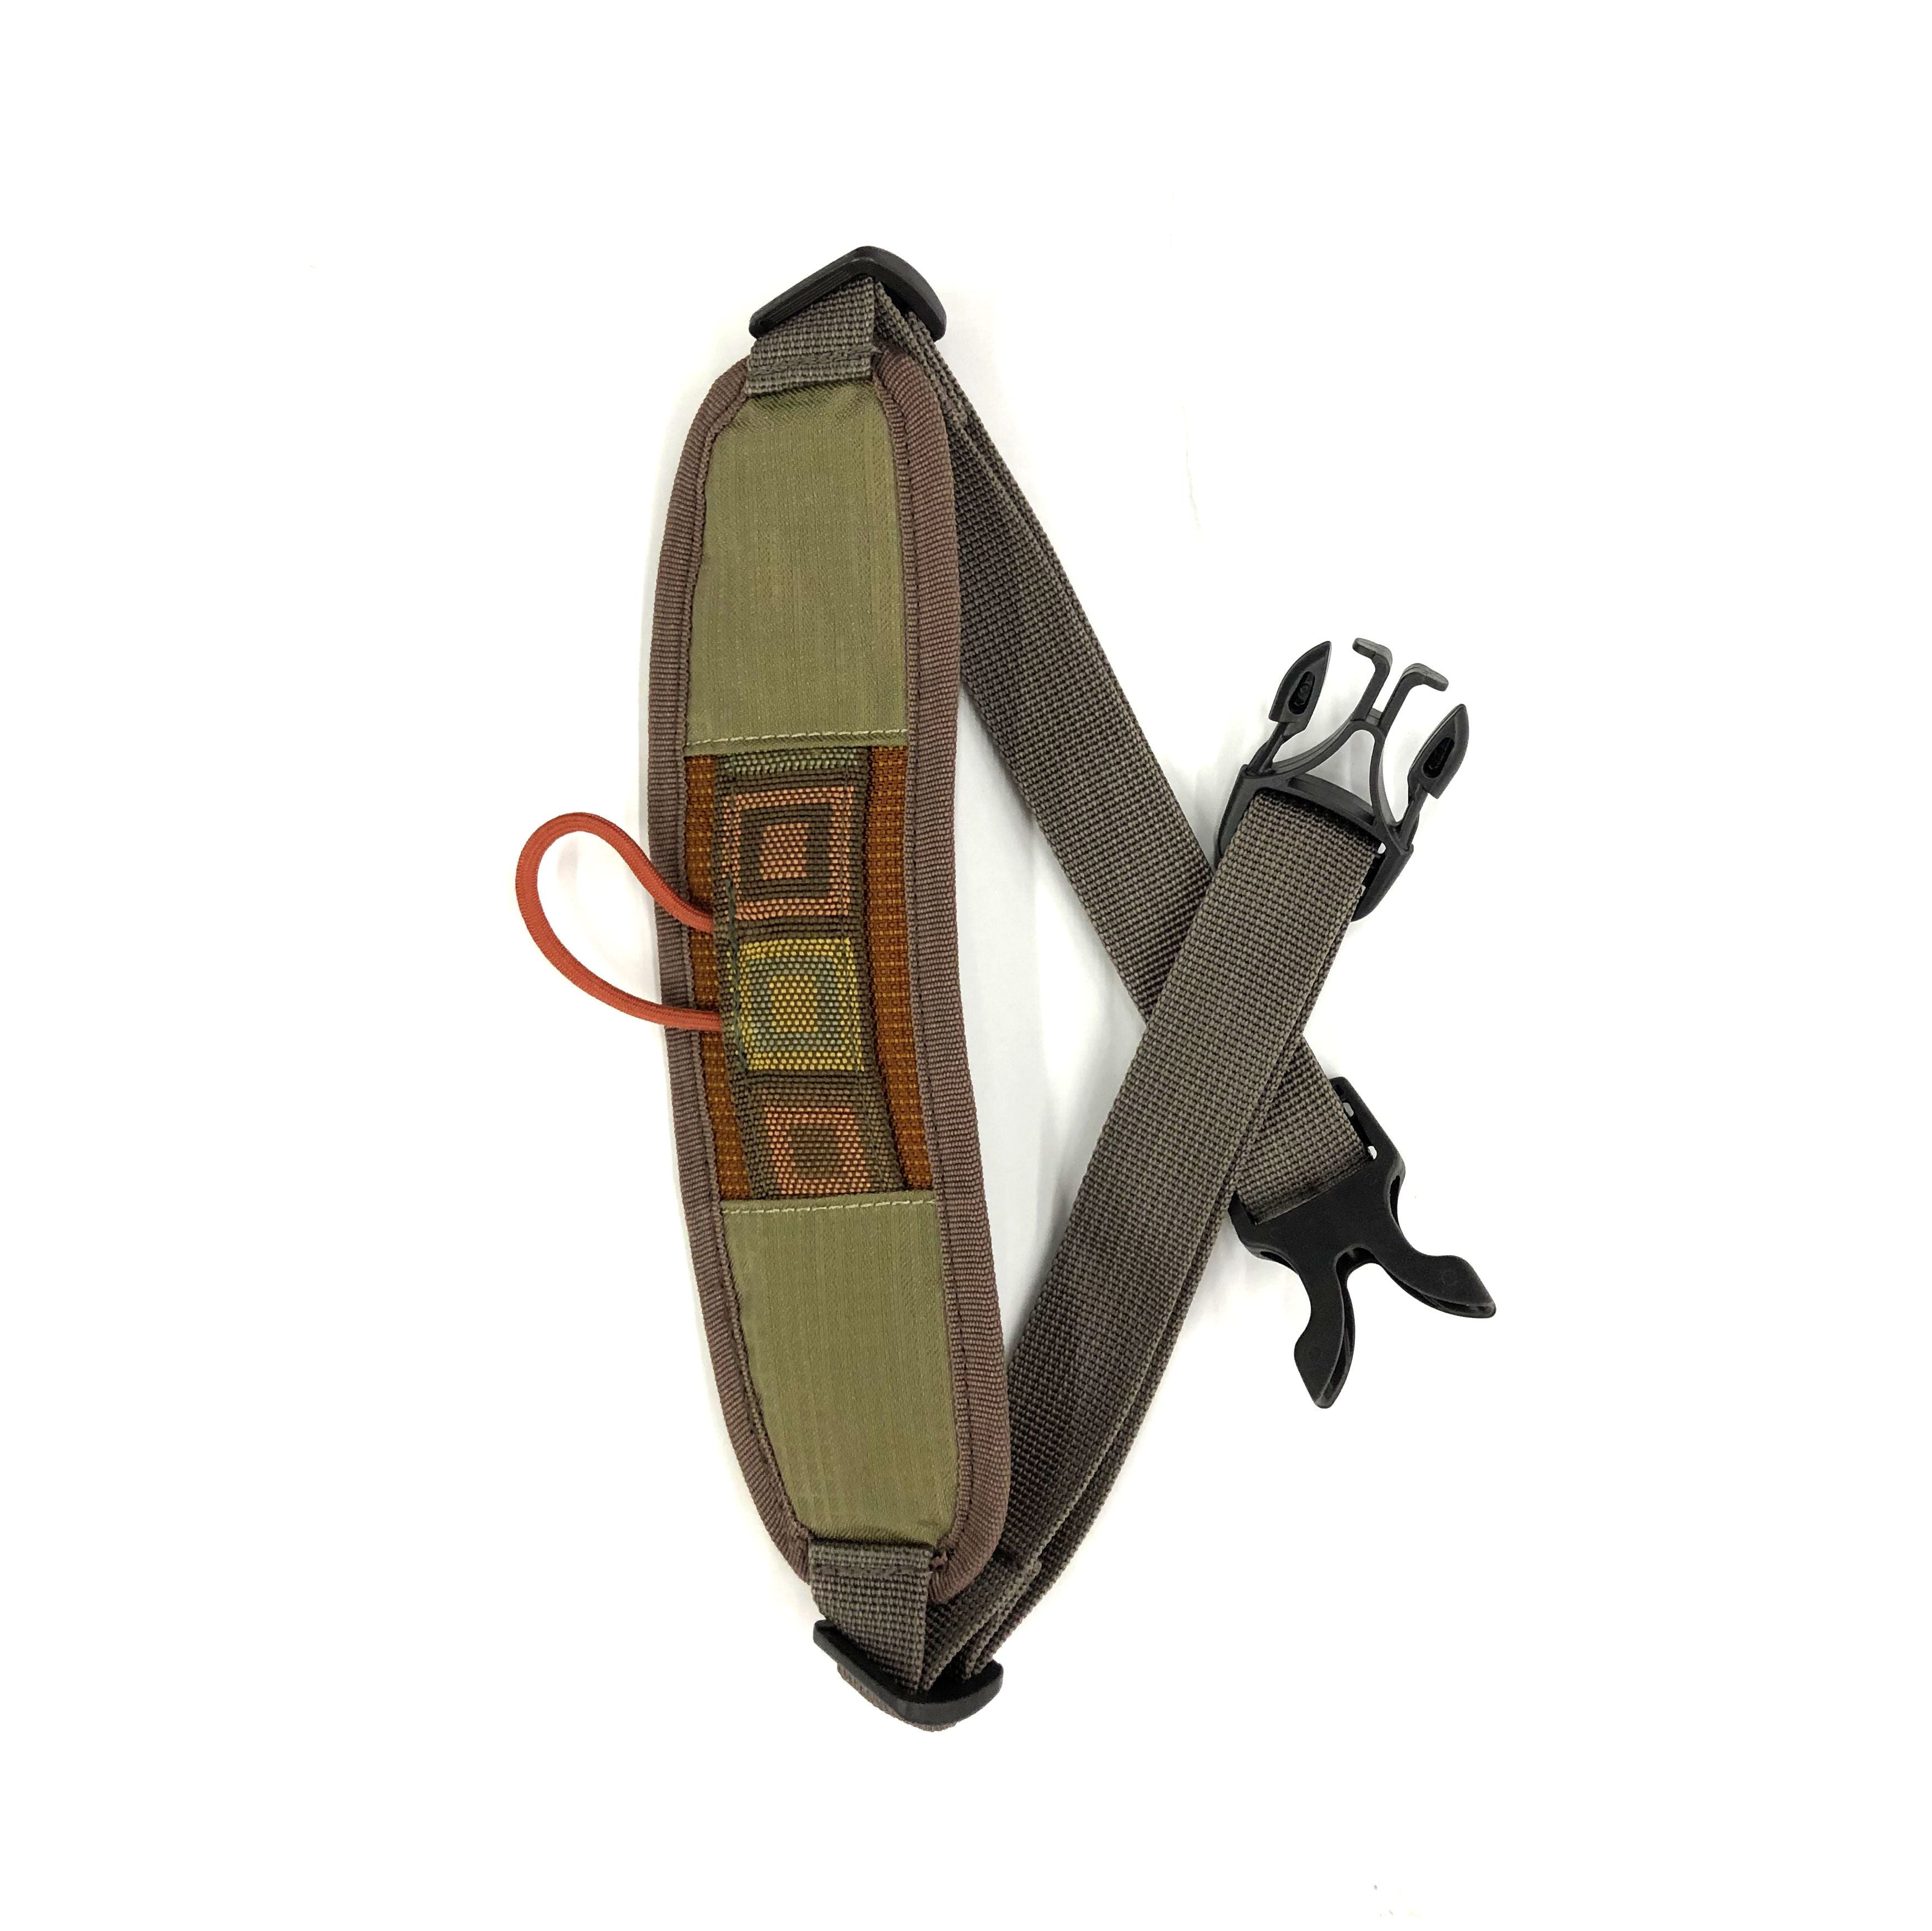 Padded Shoulder Strap, Carp Fishing Accessories